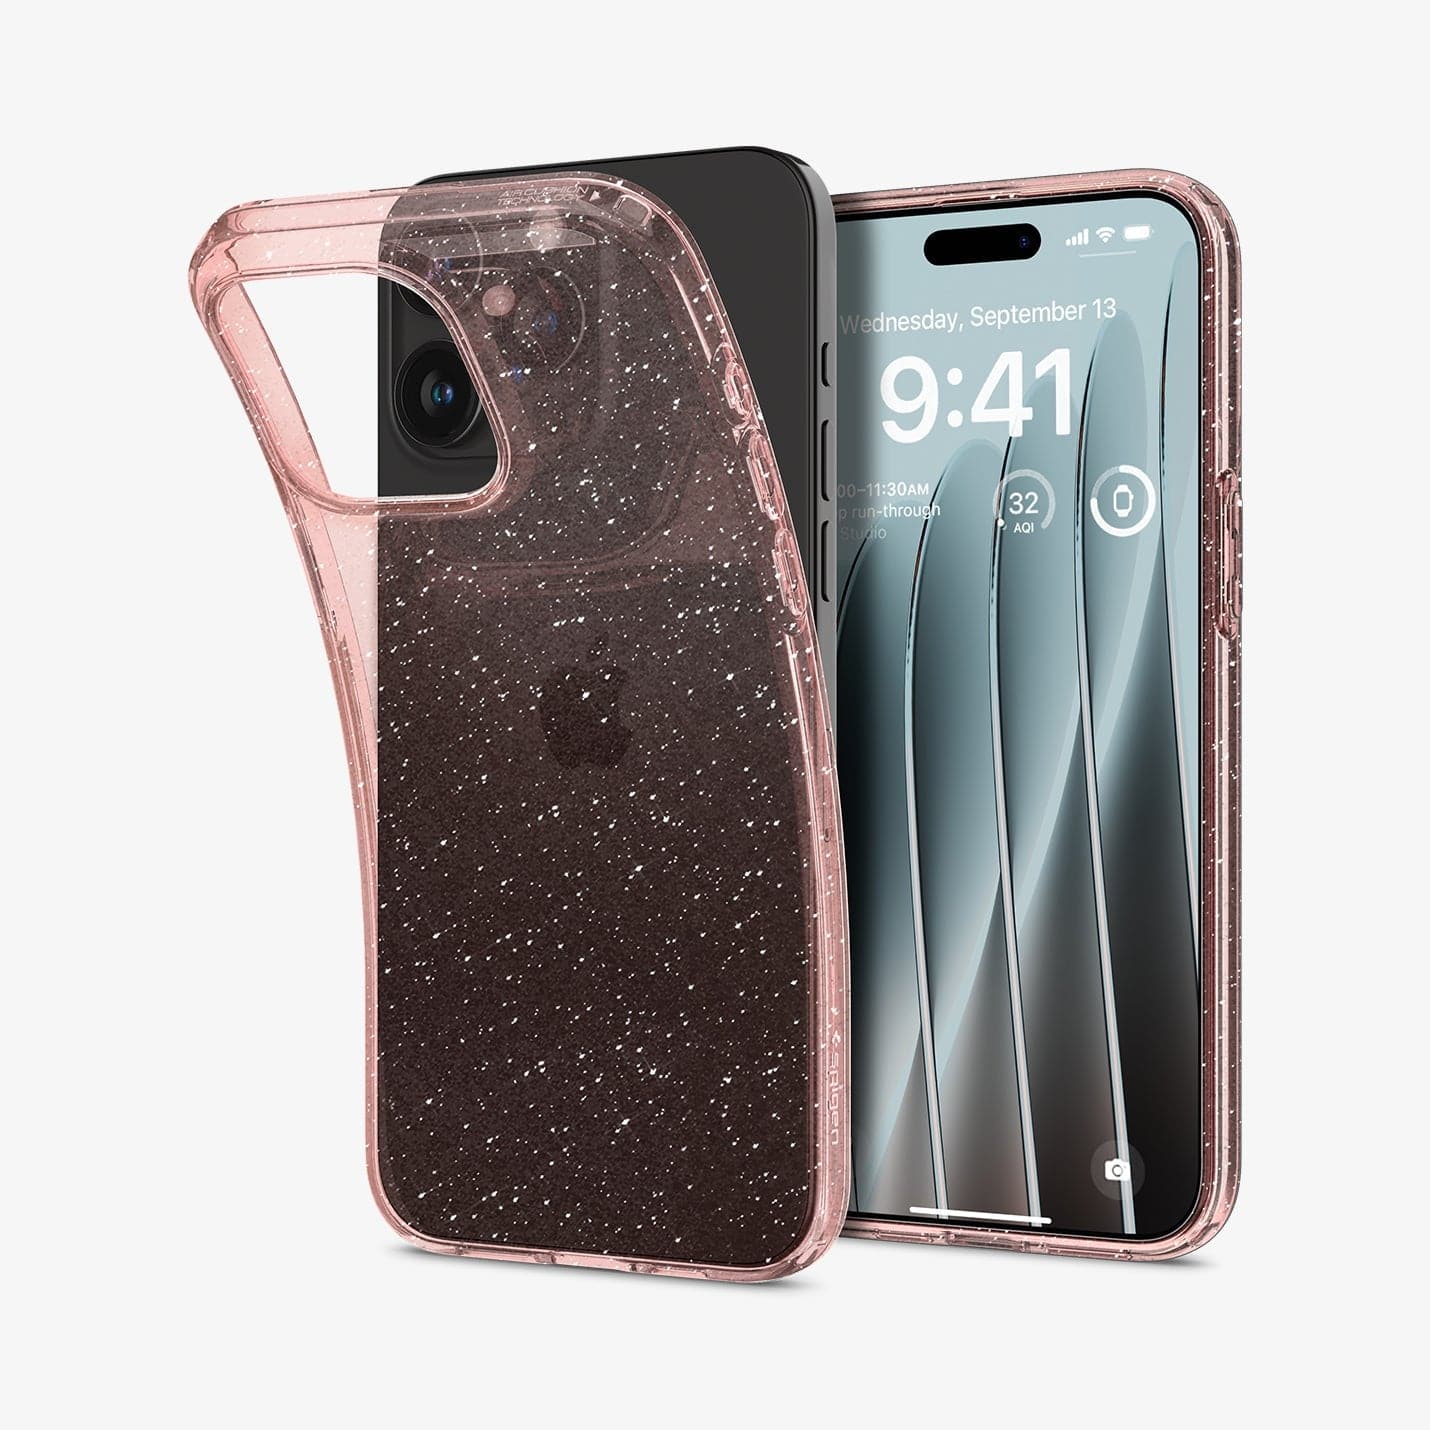 ACS06560 - iPhone 15 Pro Max Case Liquid Crystal Glitter in rose quartz showing the back and front